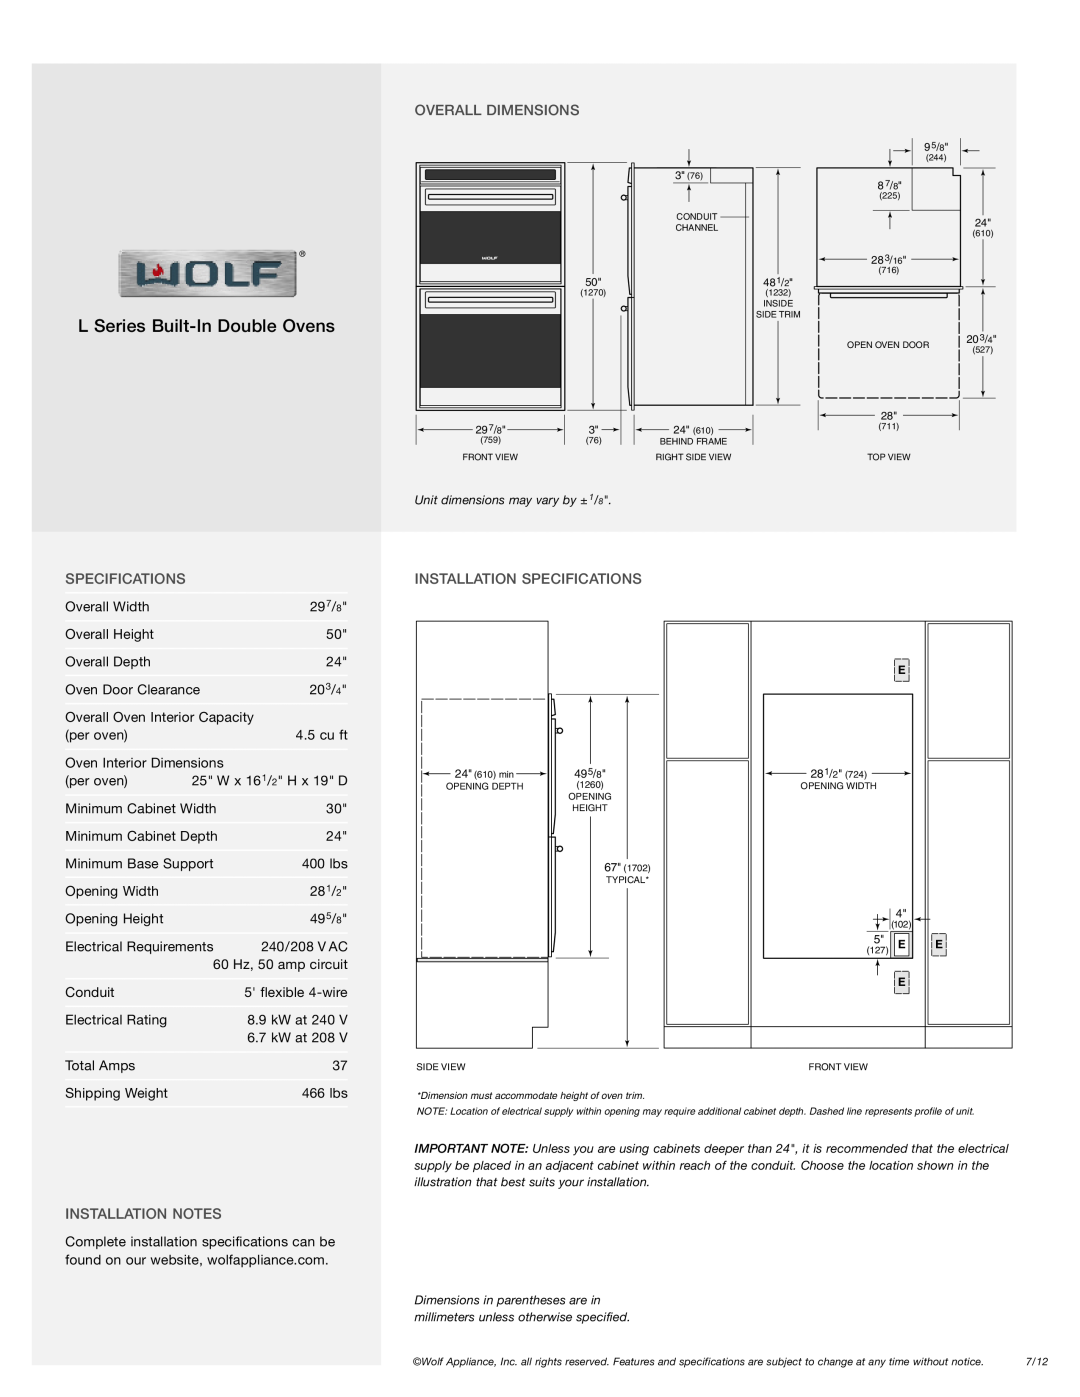 Wolf Appliance Company DO30U/S, DO30F/S manual Overall Dimensions, Installation Specifications, Installation Notes 